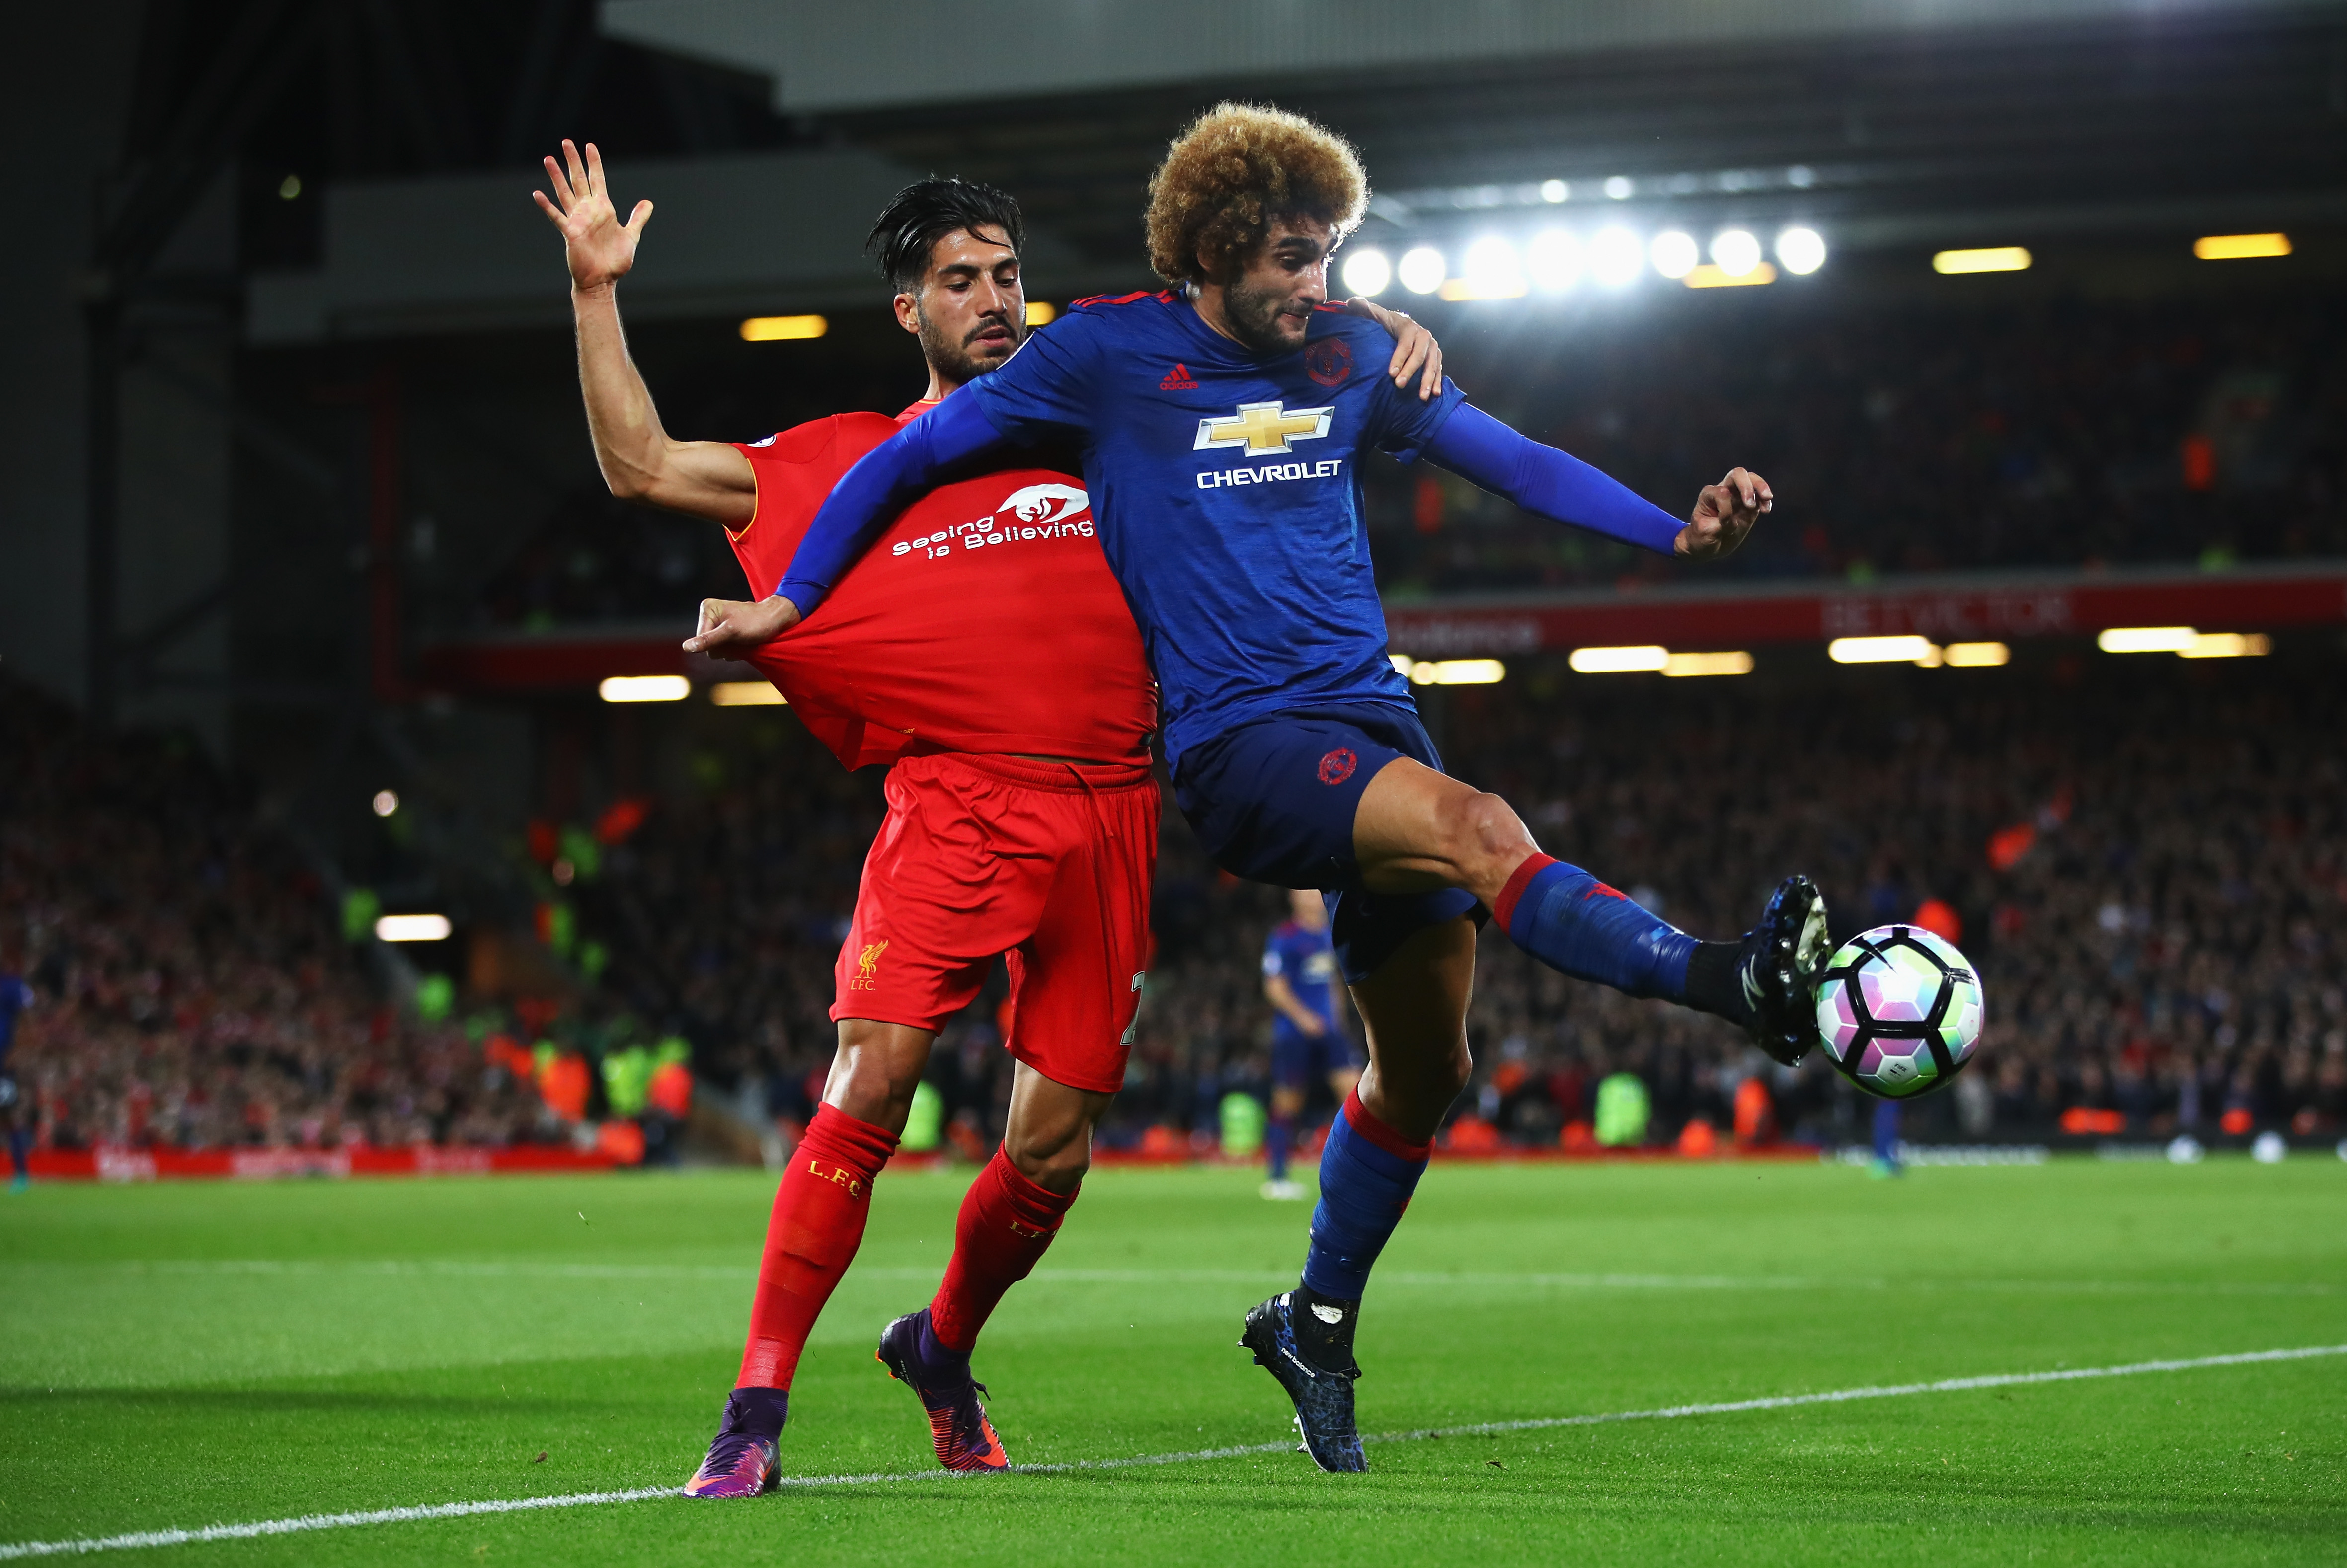 LIVERPOOL, ENGLAND - OCTOBER 17: Marouane Fellaini of Manchester United is closed down by Emre Can of Liverpool during the Premier League match between Liverpool and Manchester United at Anfield on October 17, 2016 in Liverpool, England. (Photo by Clive Brunskill/Getty Images)